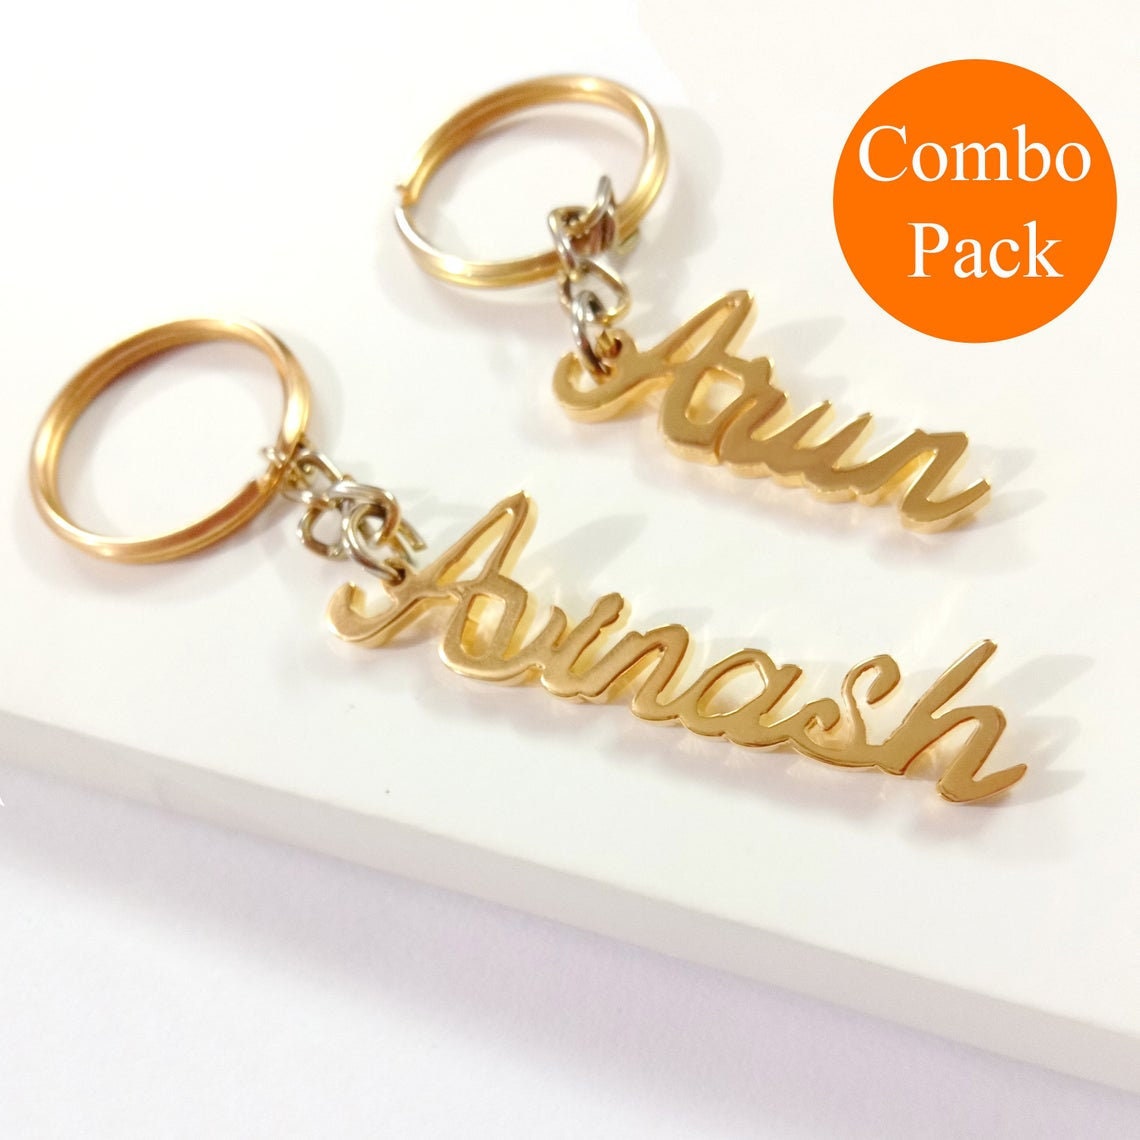 Accessories Keychains & Lanyards Lanyards & Badge Holders Gold Nameplates Label Prong Custom Brand Tag  Bag Wallet Personalized Name Made to Order 